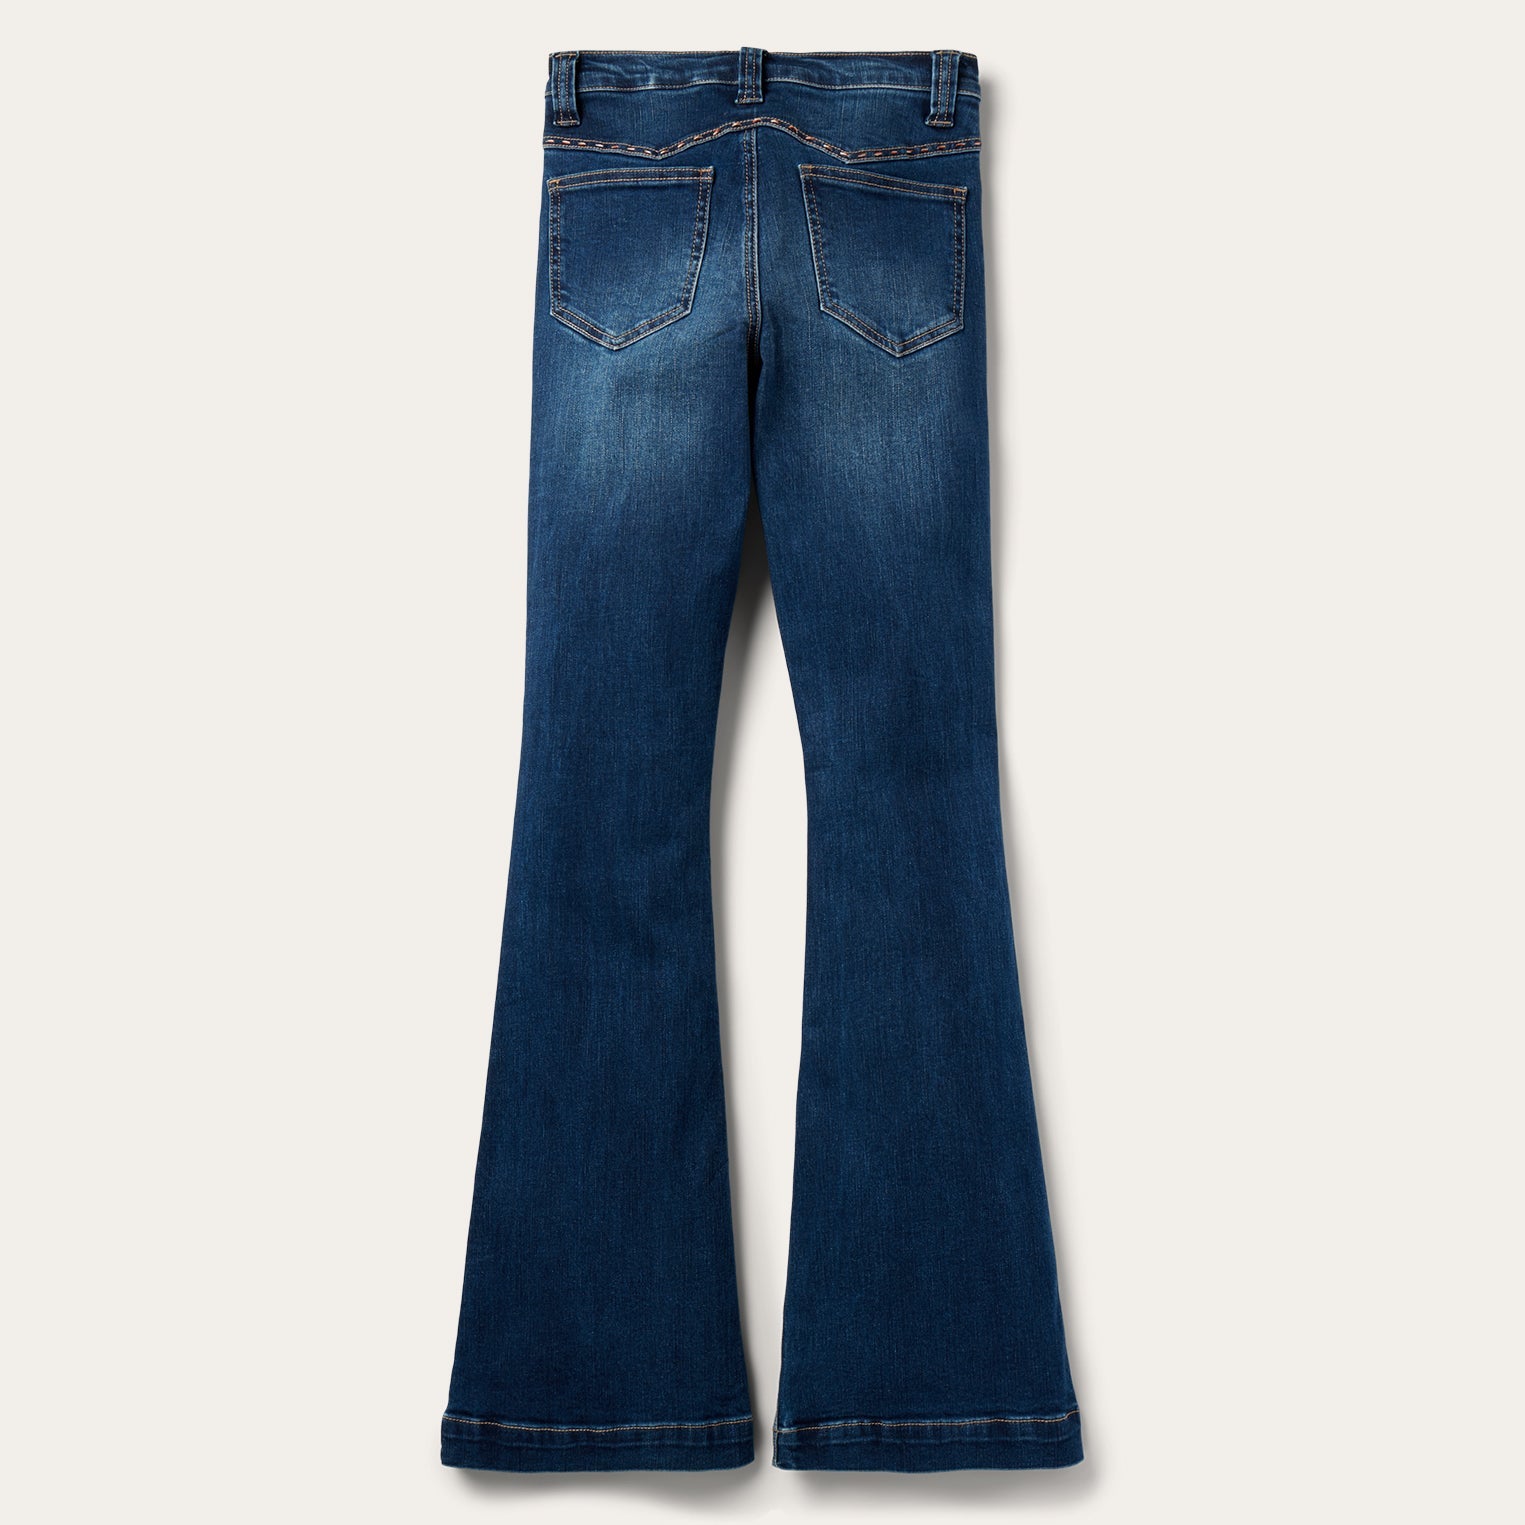 Stetson 921 High Rise Flare Jeans Blue